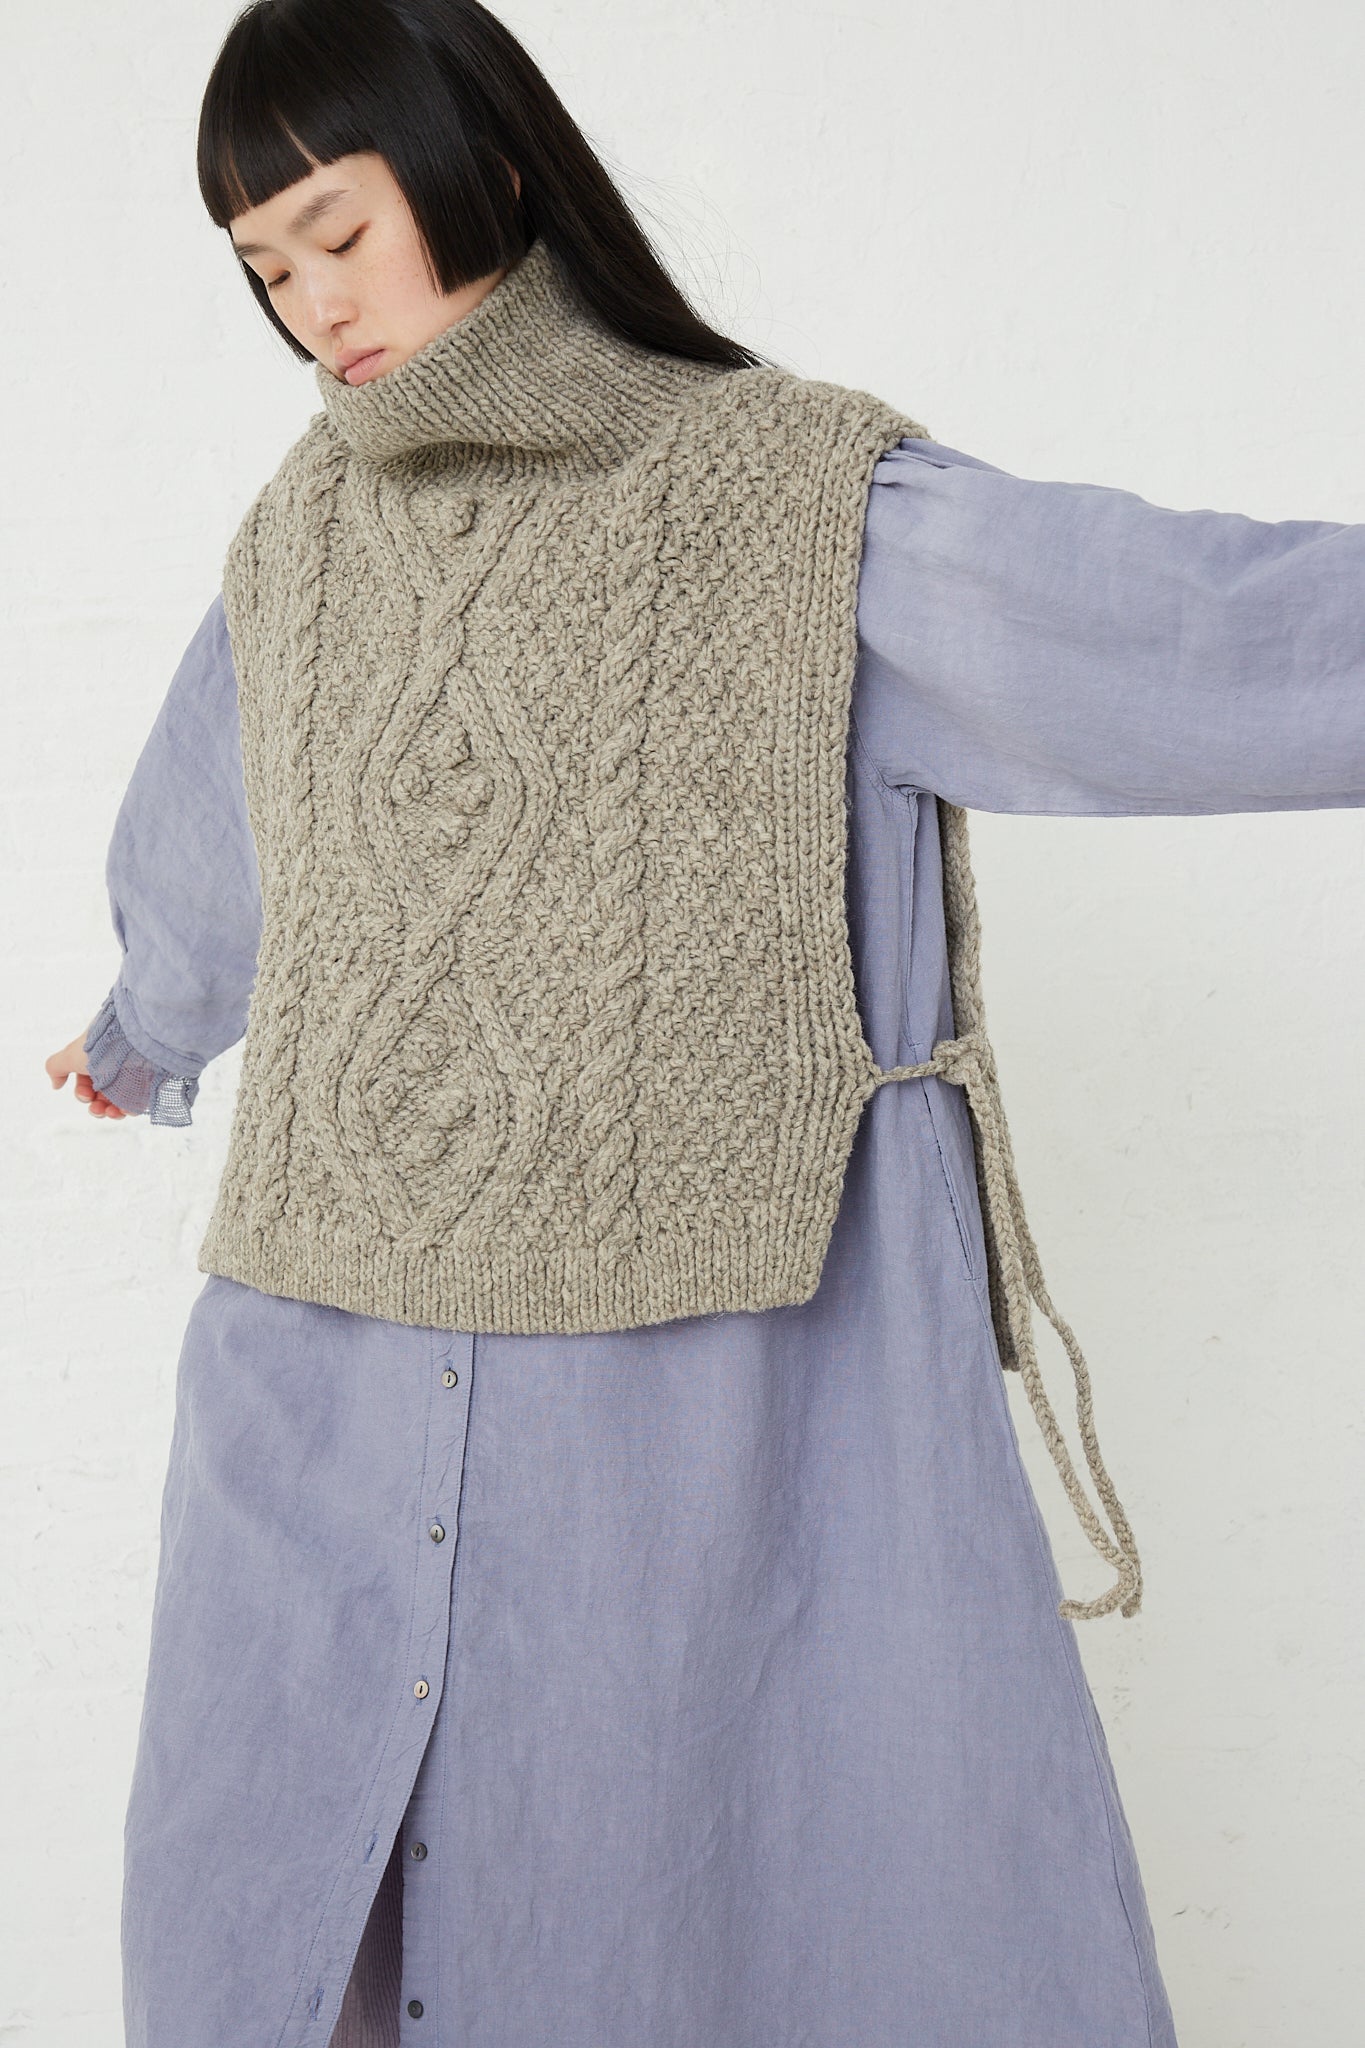 A woman in a blue dress is wearing the "Peruvian Wool Hand Knitted Cable Stitch Vest in Beige" by nest Robe, an open-side turtleneck vest knitted with ethically raised sheep wool.